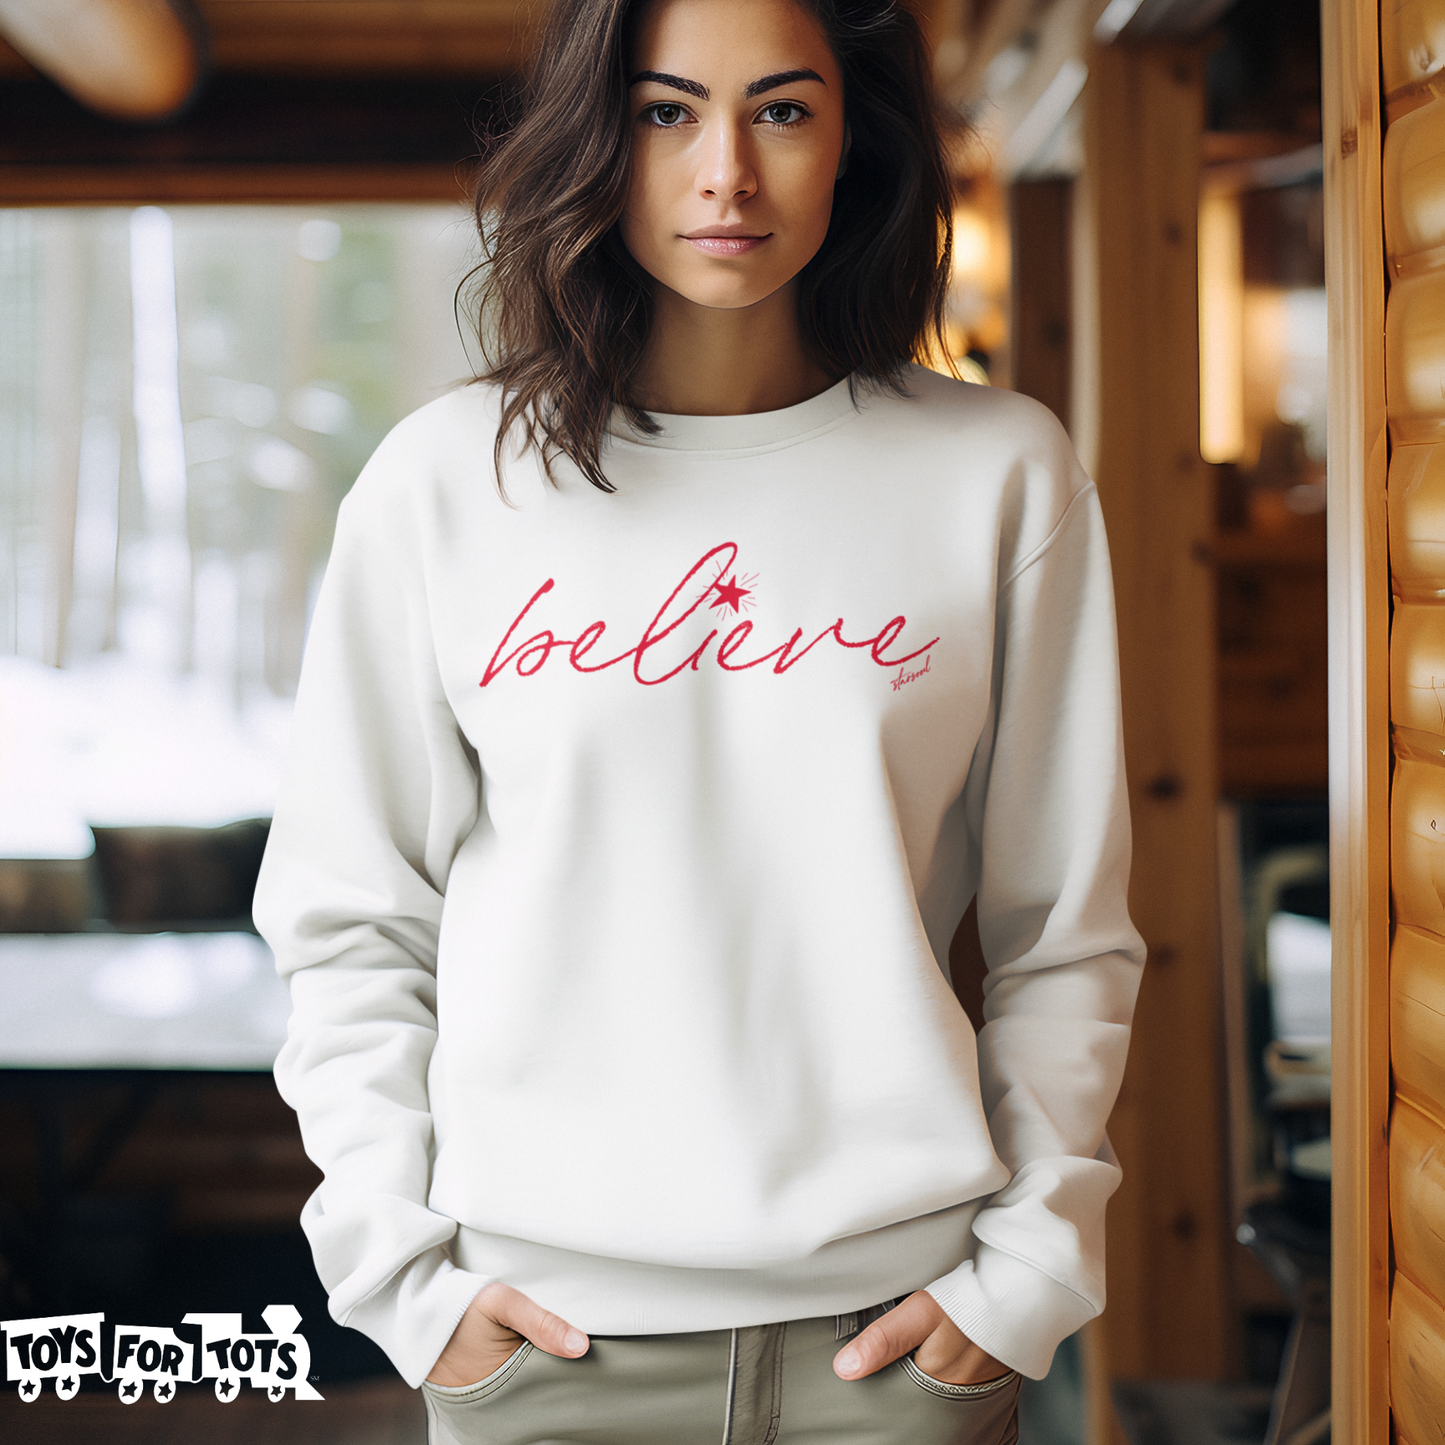 white sweatshirt with "believe" in red across front, benefitting toys for tots